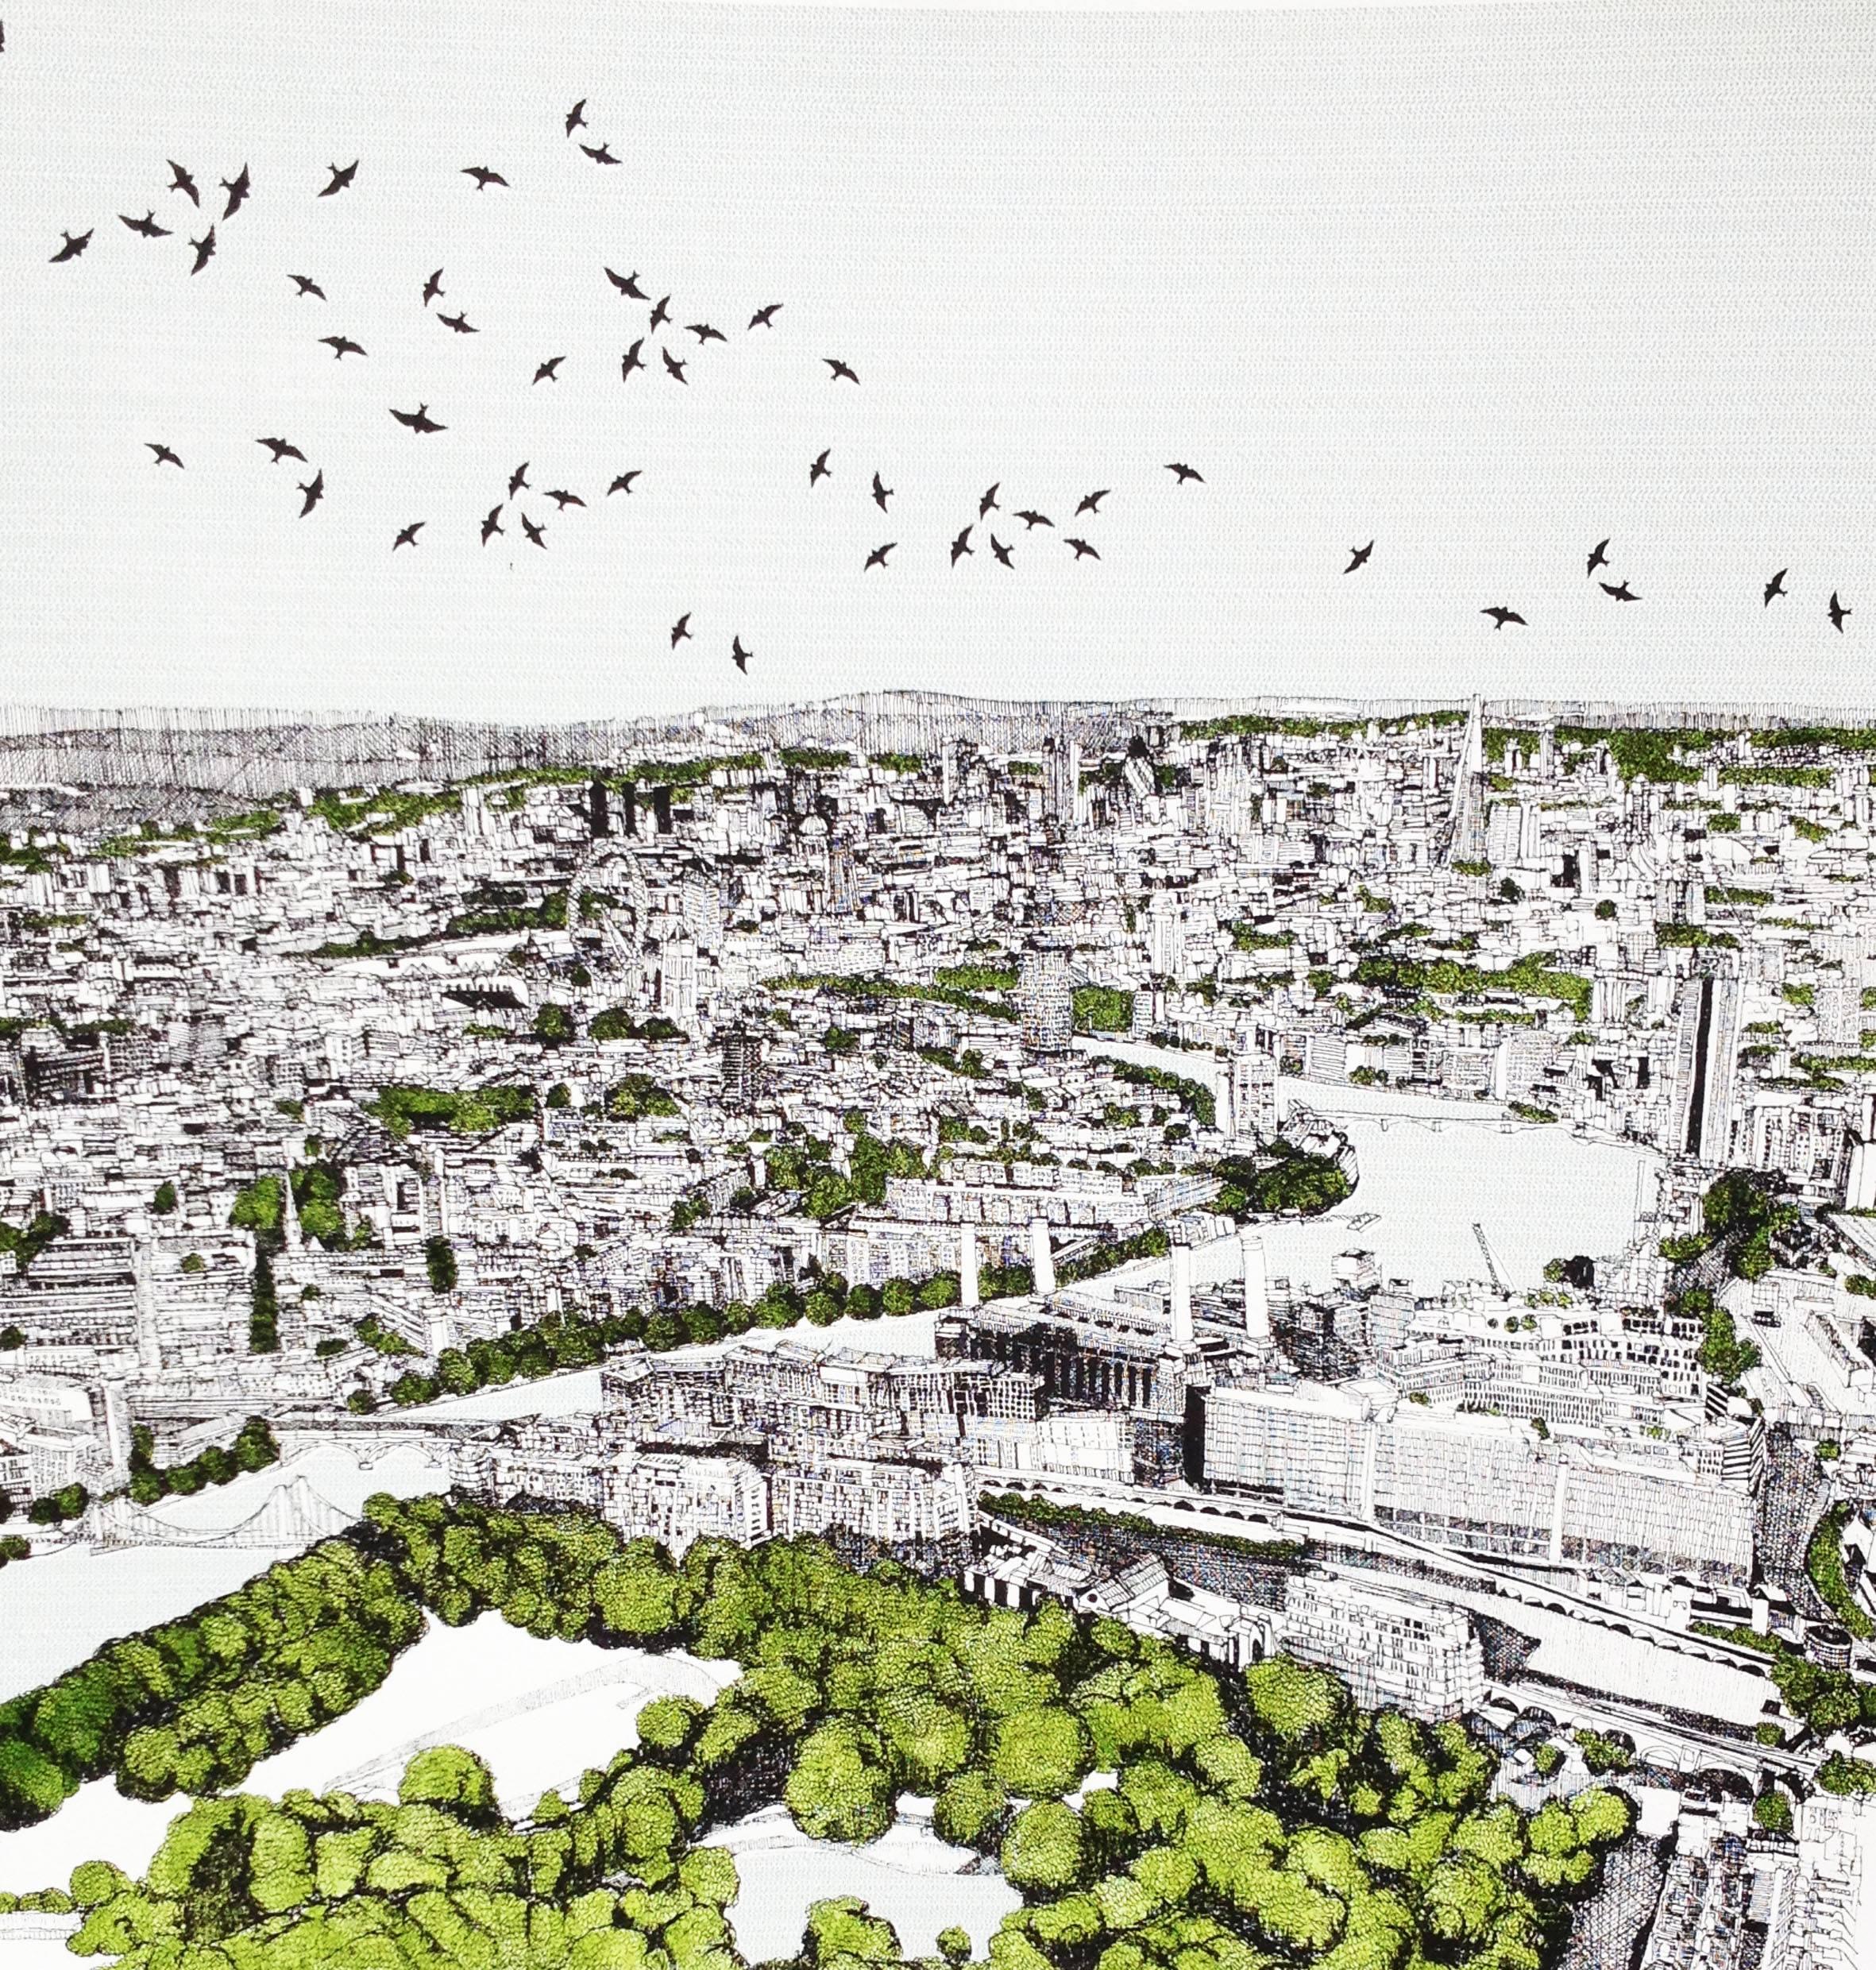 Clare Halifax
London!
Limited Edition Print
Image Size:H50cm x W49cm
Sheet Size: H64cm x W56cm
(Please note that in situ images are purely an indication of how a piece may look).

London! This piece was an attempt to get the majority of the